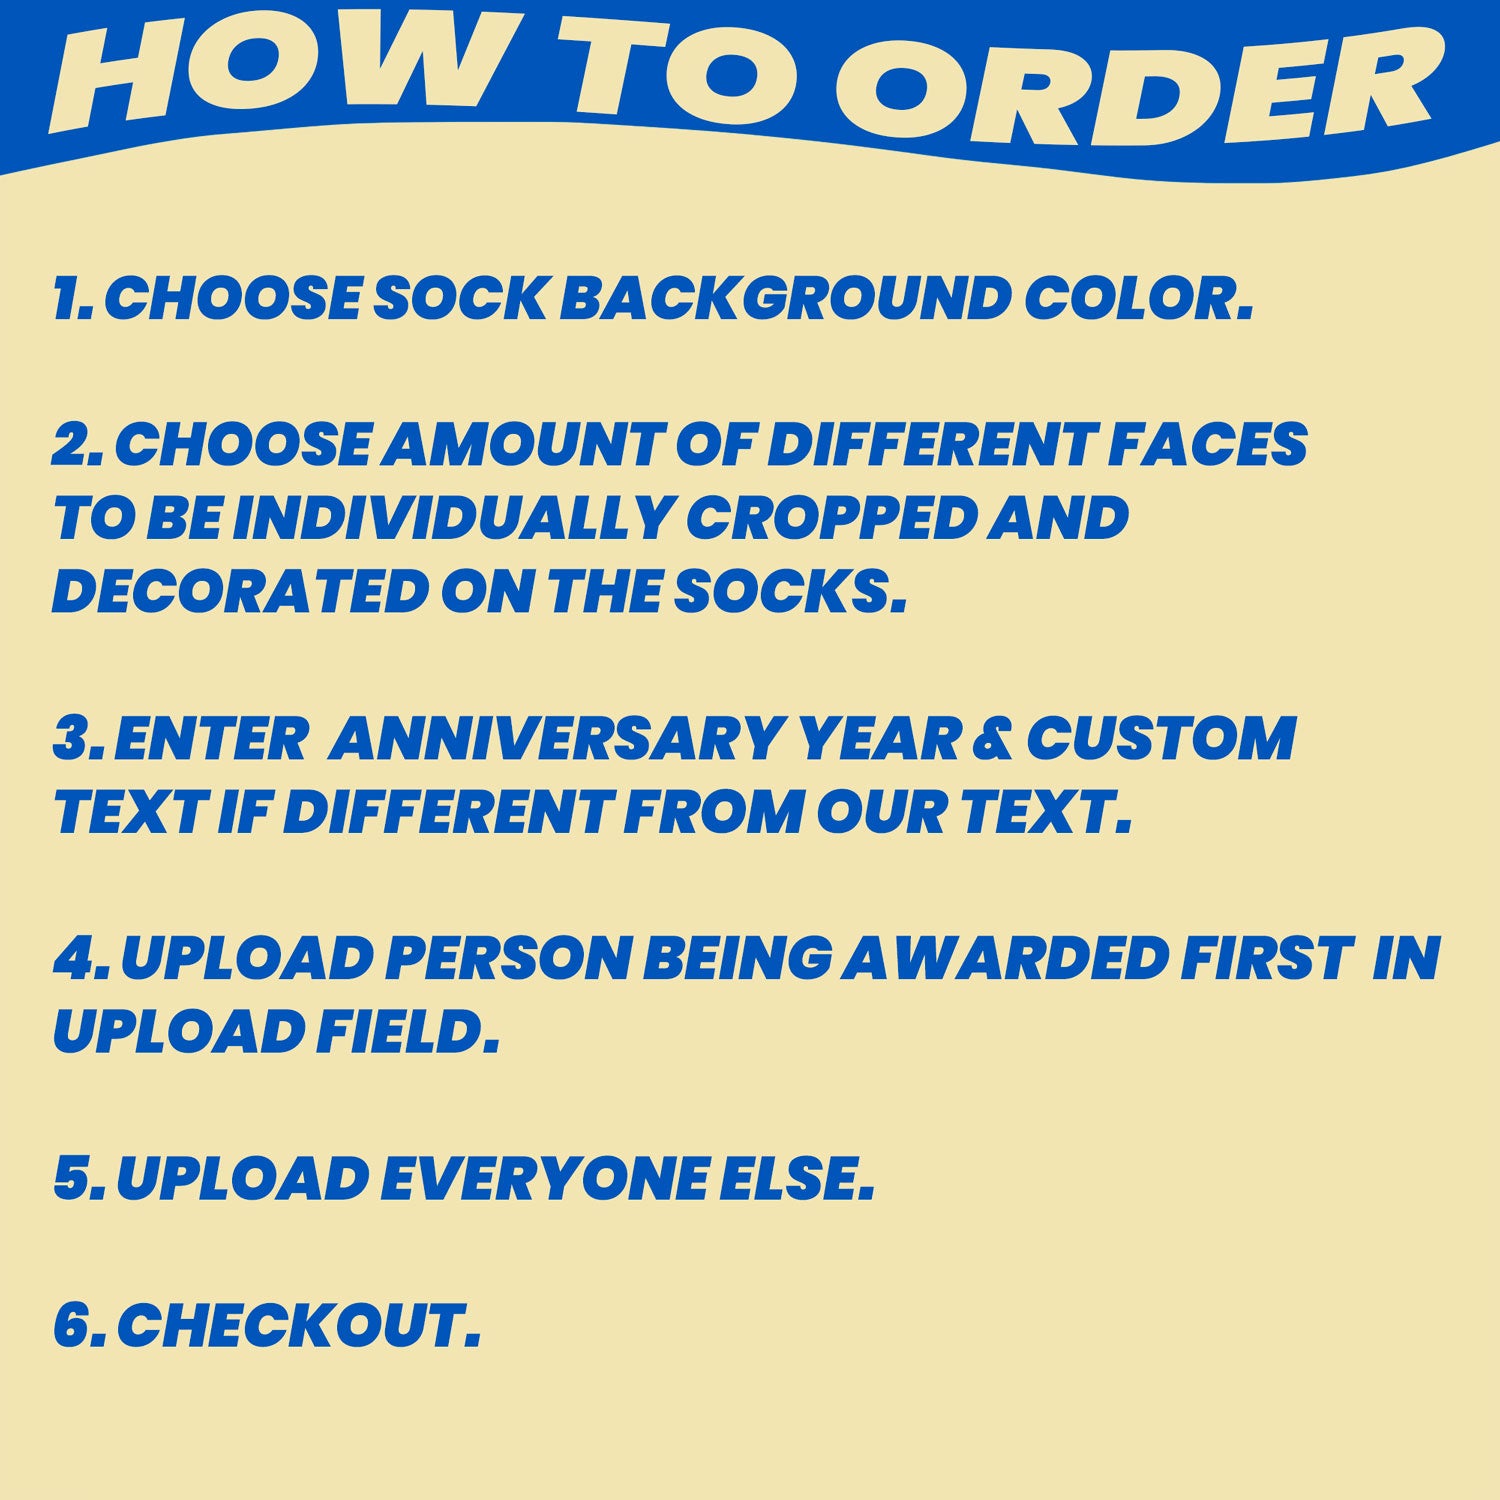 employee anniversary personalized socks with coworkers faces instructions on how to order